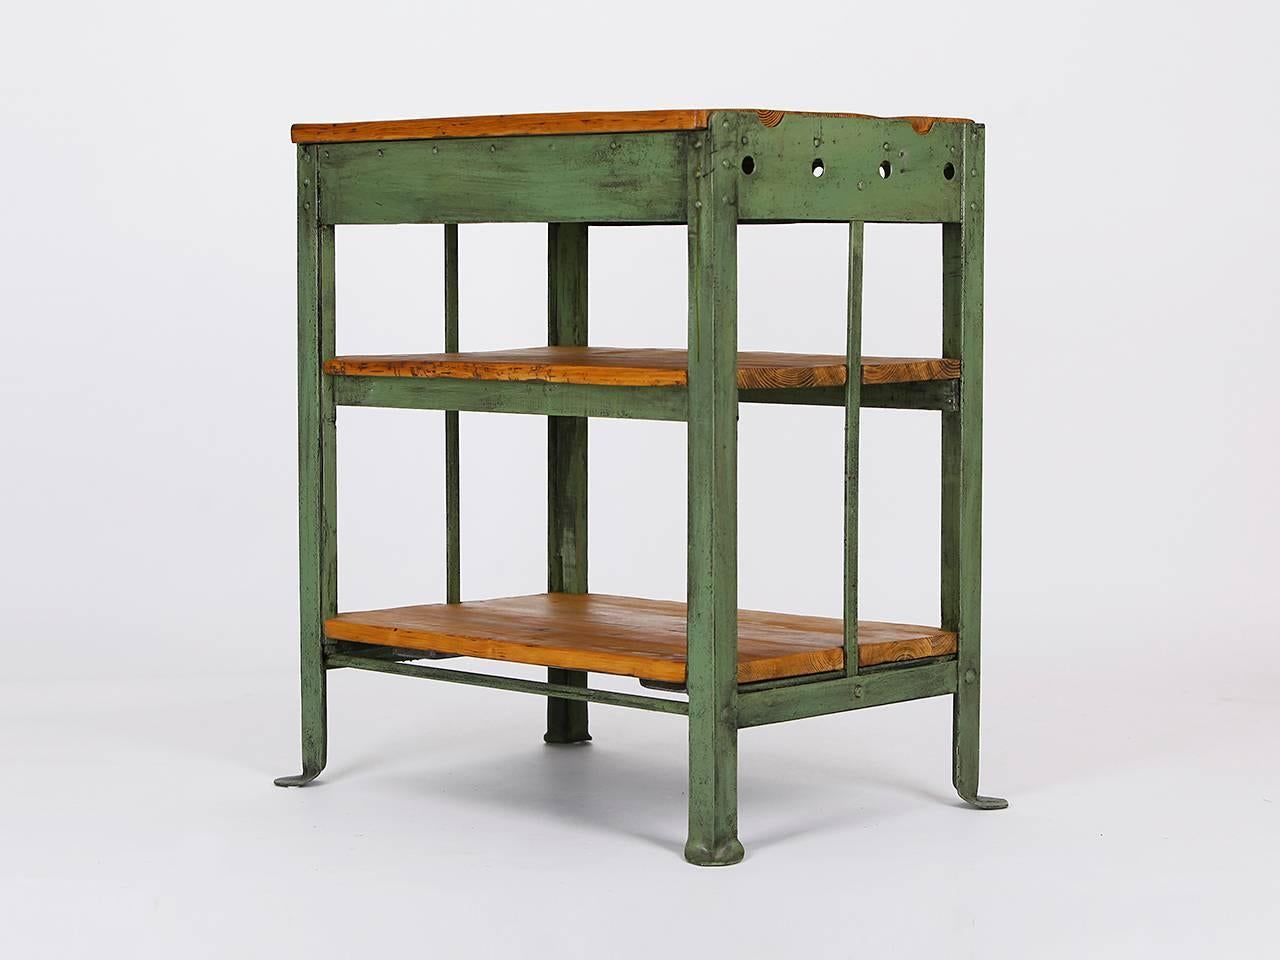 Workbench from a Czech factory. Made in the 1940s. The iron frame was cleaned. The wood panels have been restored.
 